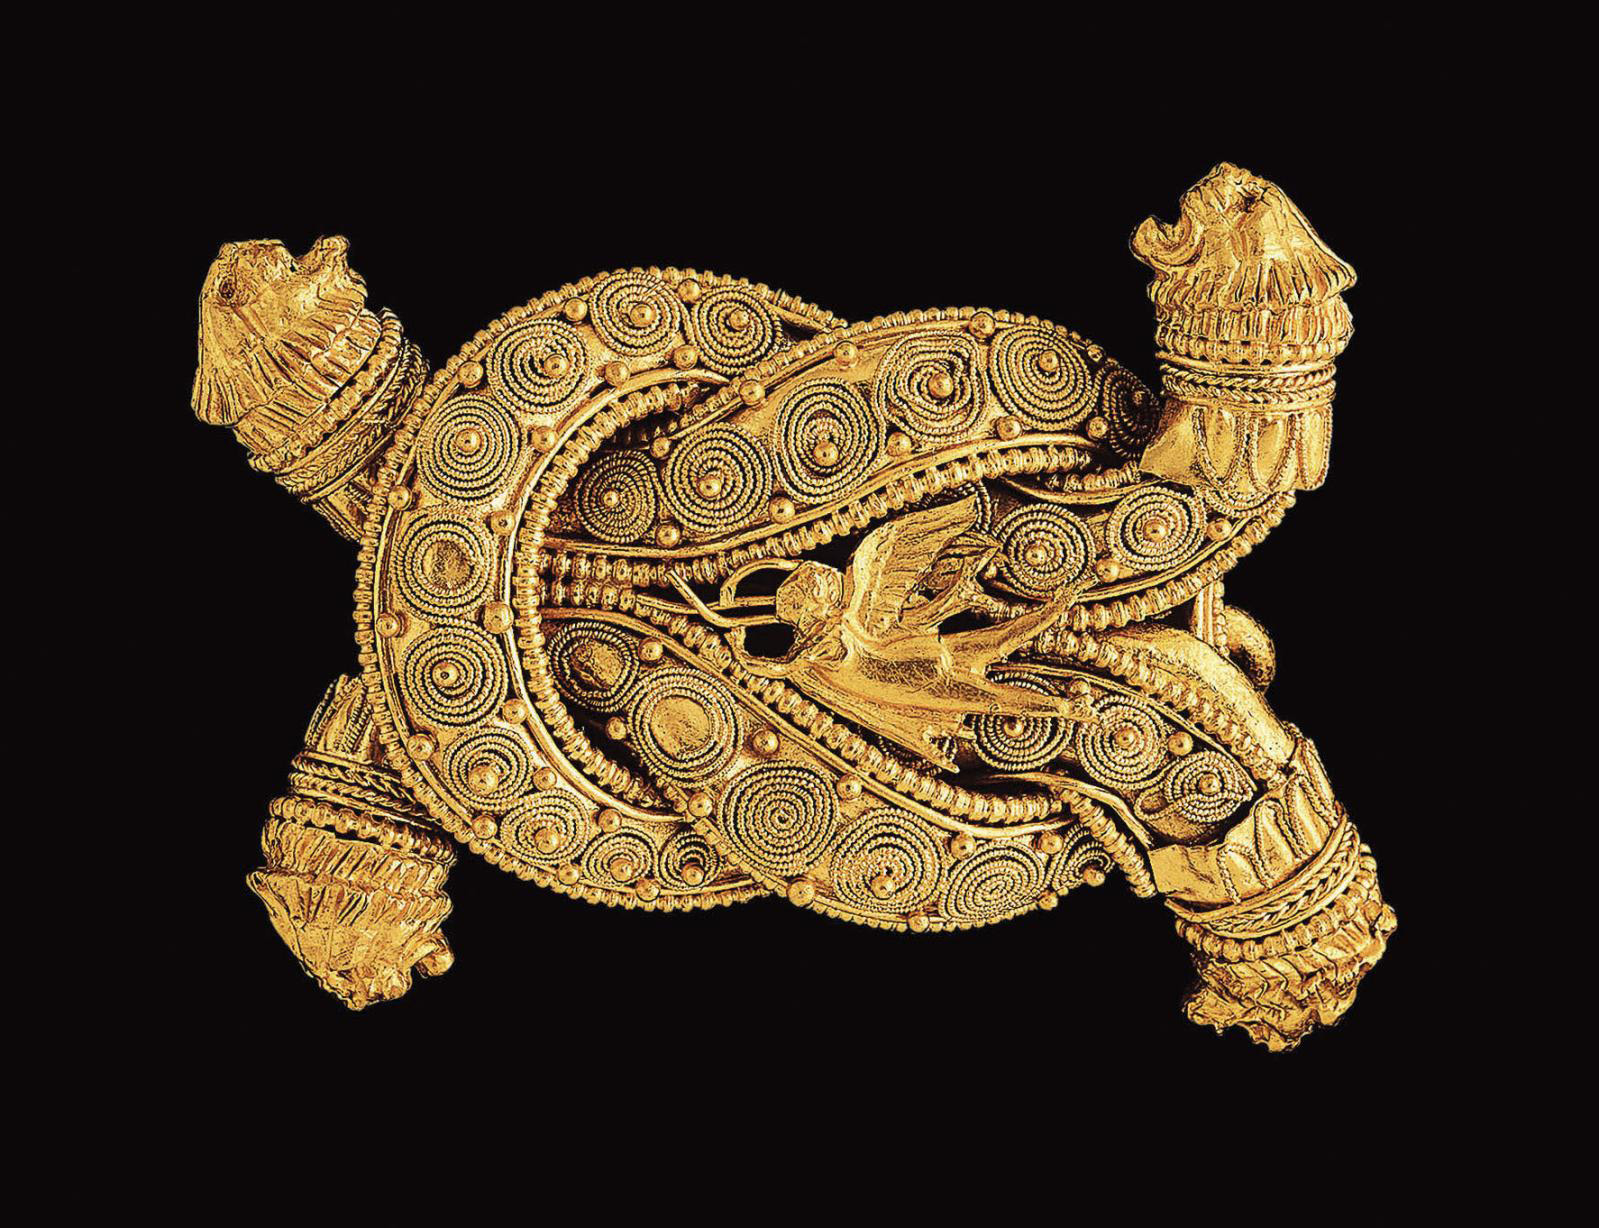 Gold brooch, Greece, Hellenistic period, c. 300 BC.Photo: Prudence Cuming Ltd. Al Thani Collection. All rights reserved